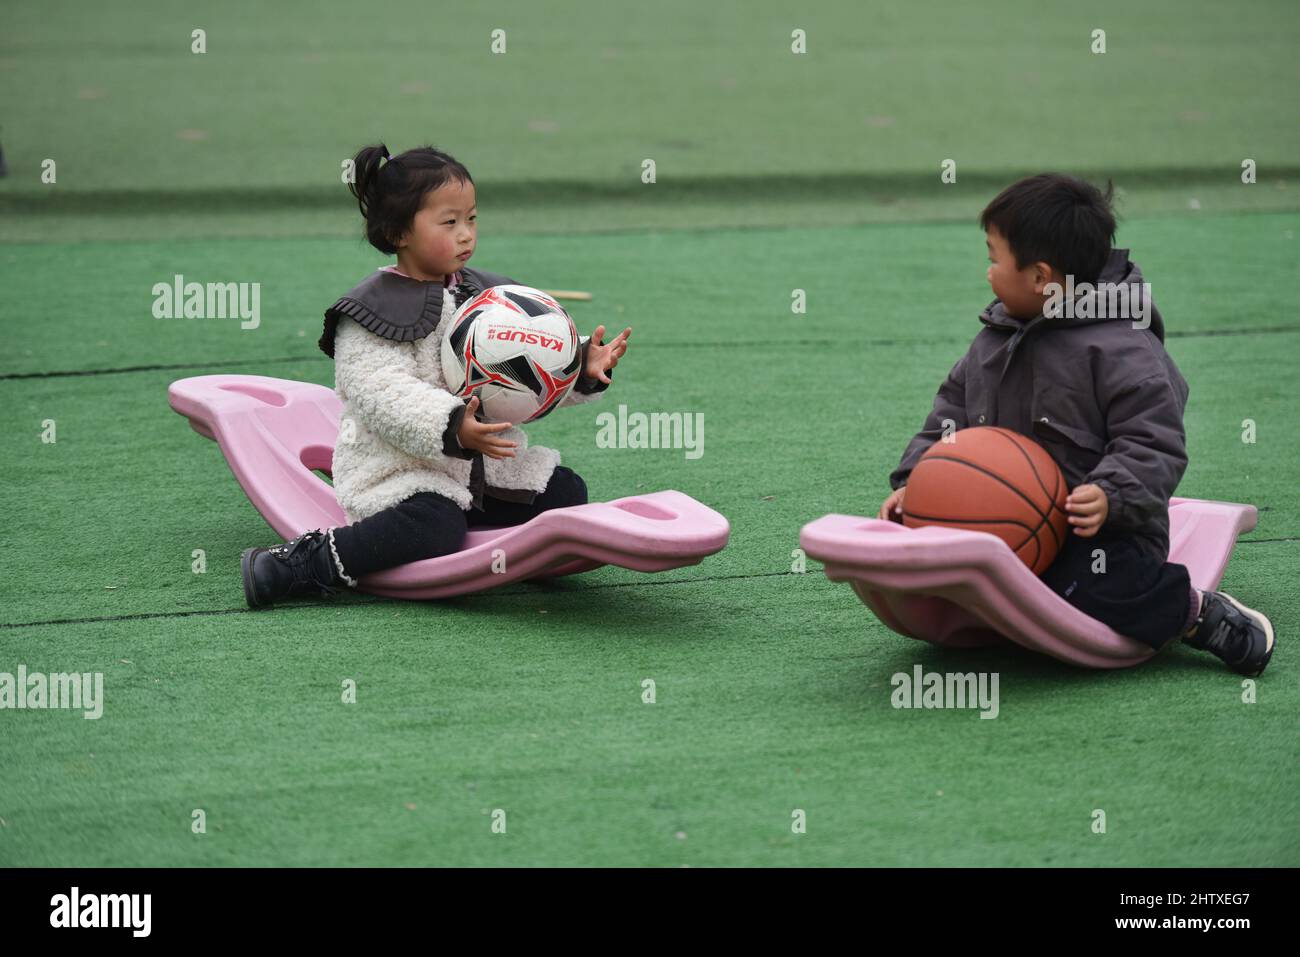 Two children are playing with a ball in the playground of the kindergarten.The National Bureau of Statistics of China released the Statistical Communique on the 2021 National Economic and Social Development. According to the communique, China's population at the end of 2021 was 1,412.6 million, an increase of 480,000 over the previous year, including 914.25 million permanent urban residents. There were 10.62 million births, with a birth rate of 7.52 per thousand. 10.14 million people died, with a mortality rate of 7.18 per thousand. The natural growth rate is 0.34%. (Photo by Sheldon Cooper / Stock Photo